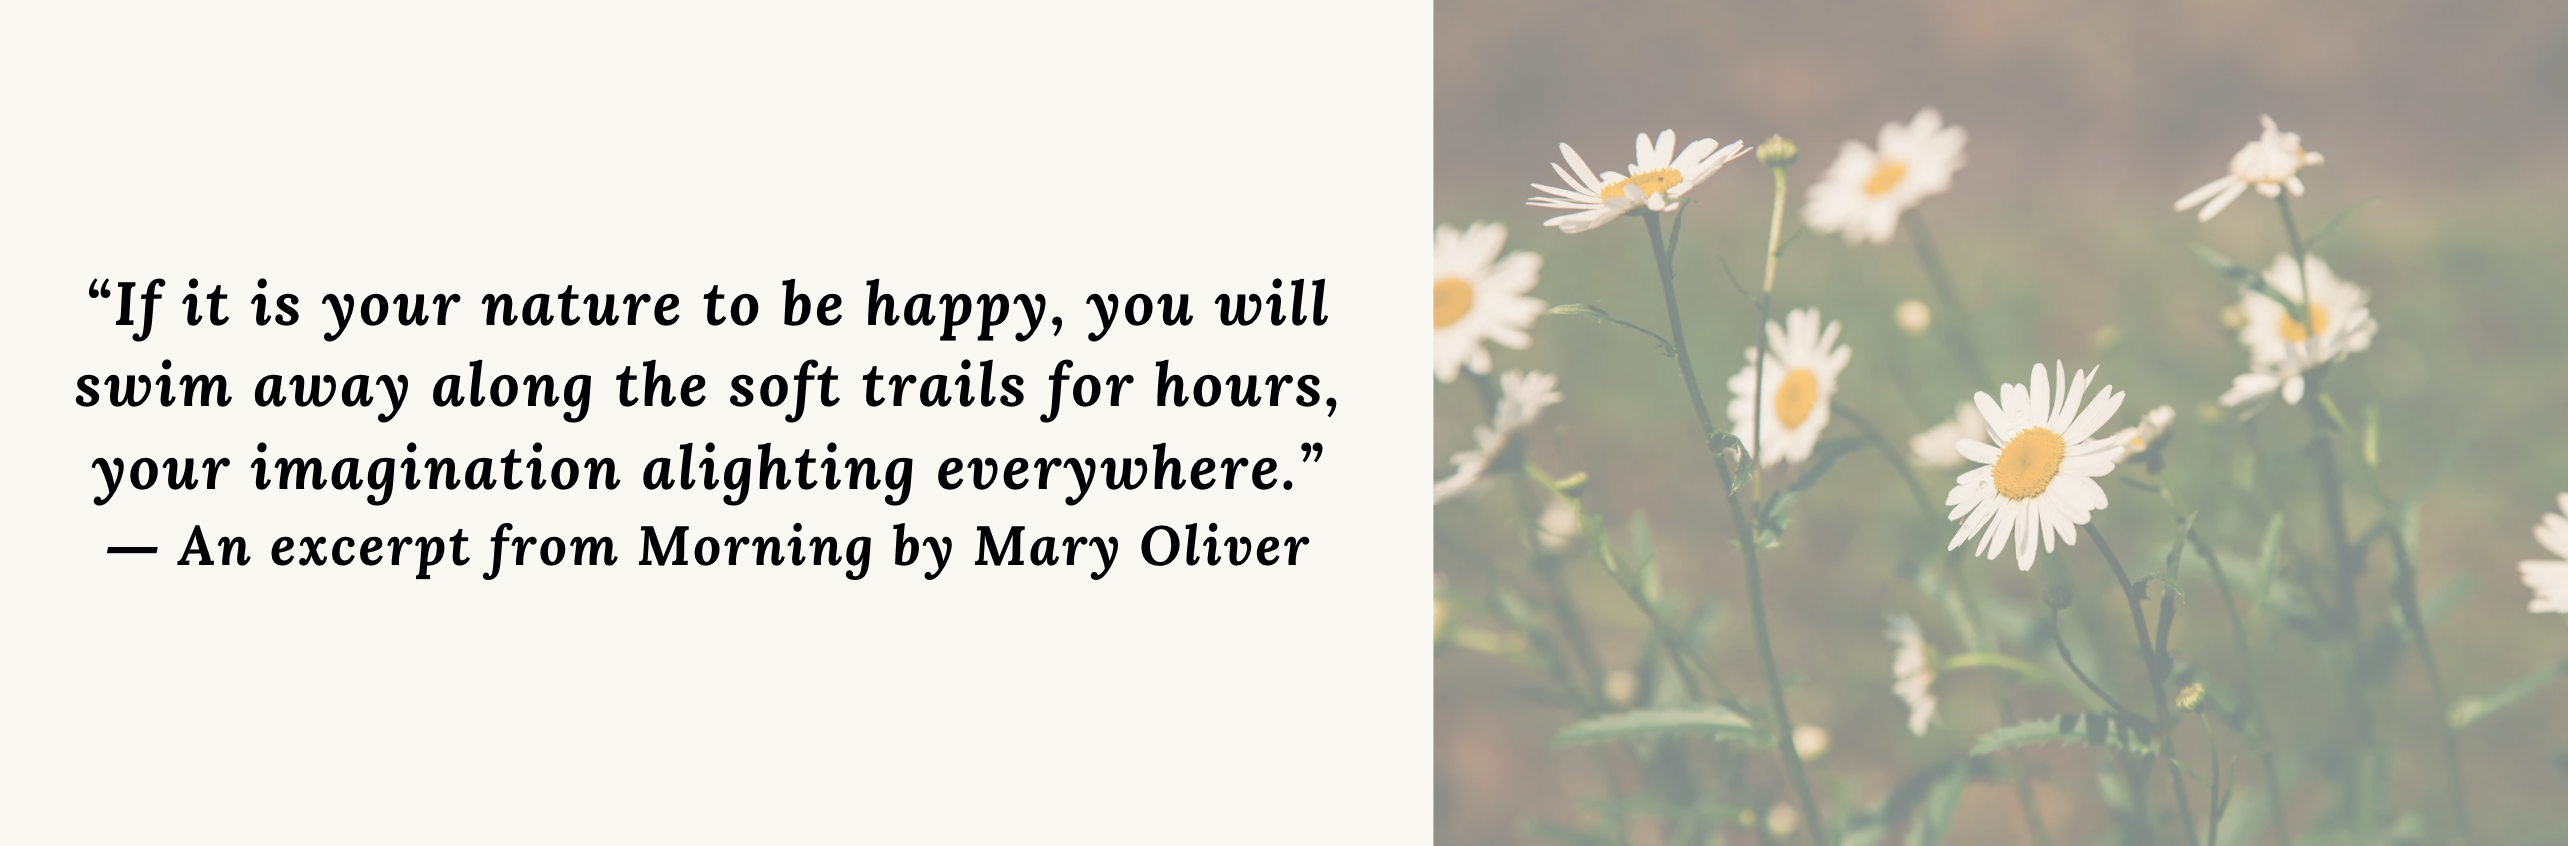 “If it is your nature to be happy, you will swim away along the soft trails for hours, your imagination alighting everywhere.” - Morning, Mary Oliver